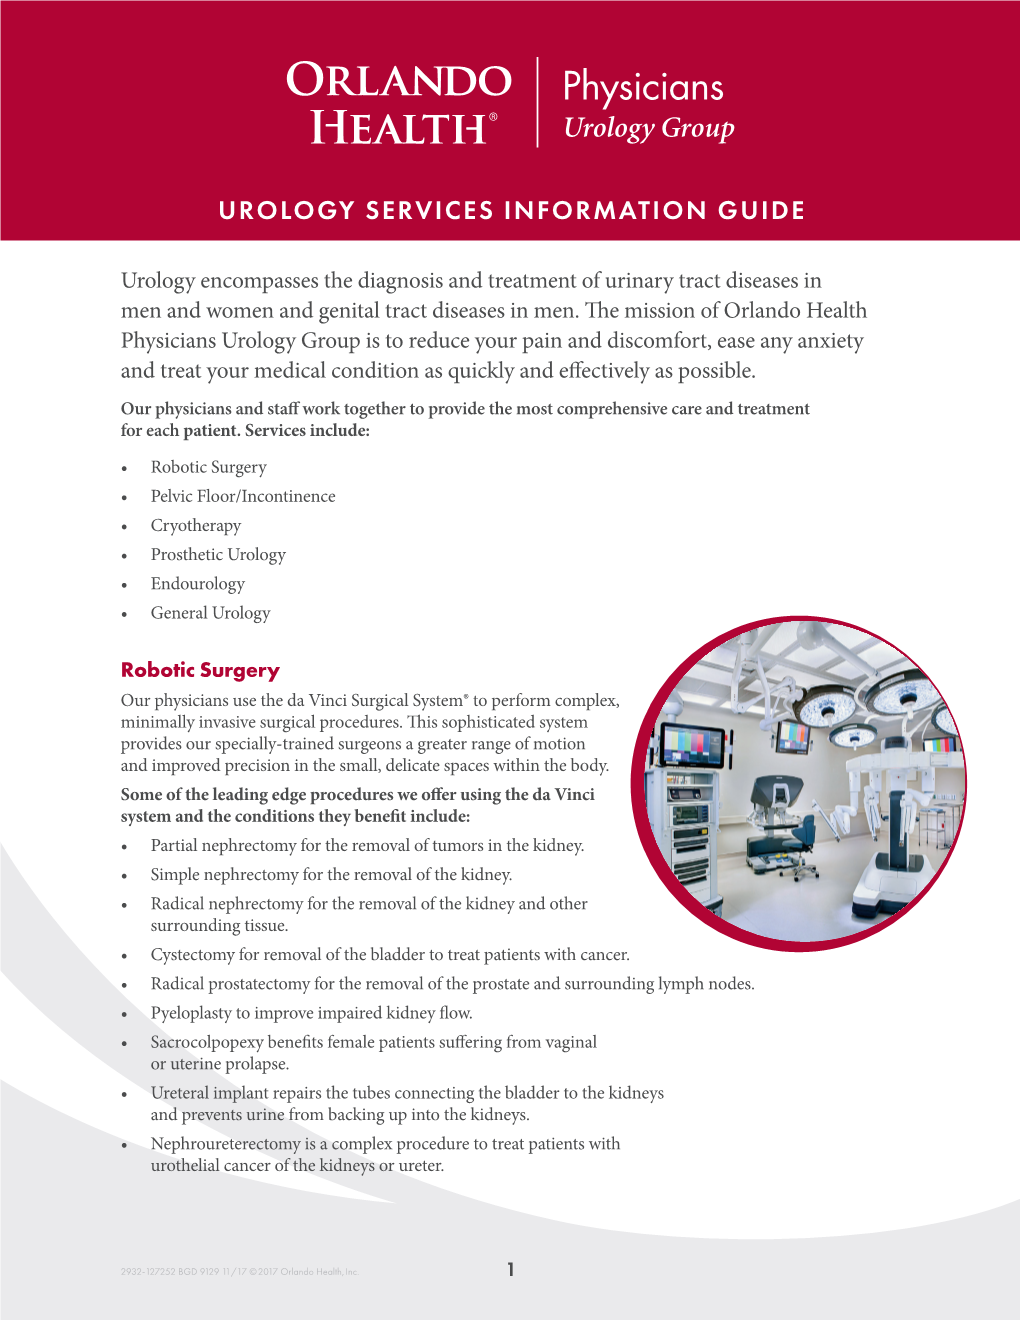 Urology Services Information Guide